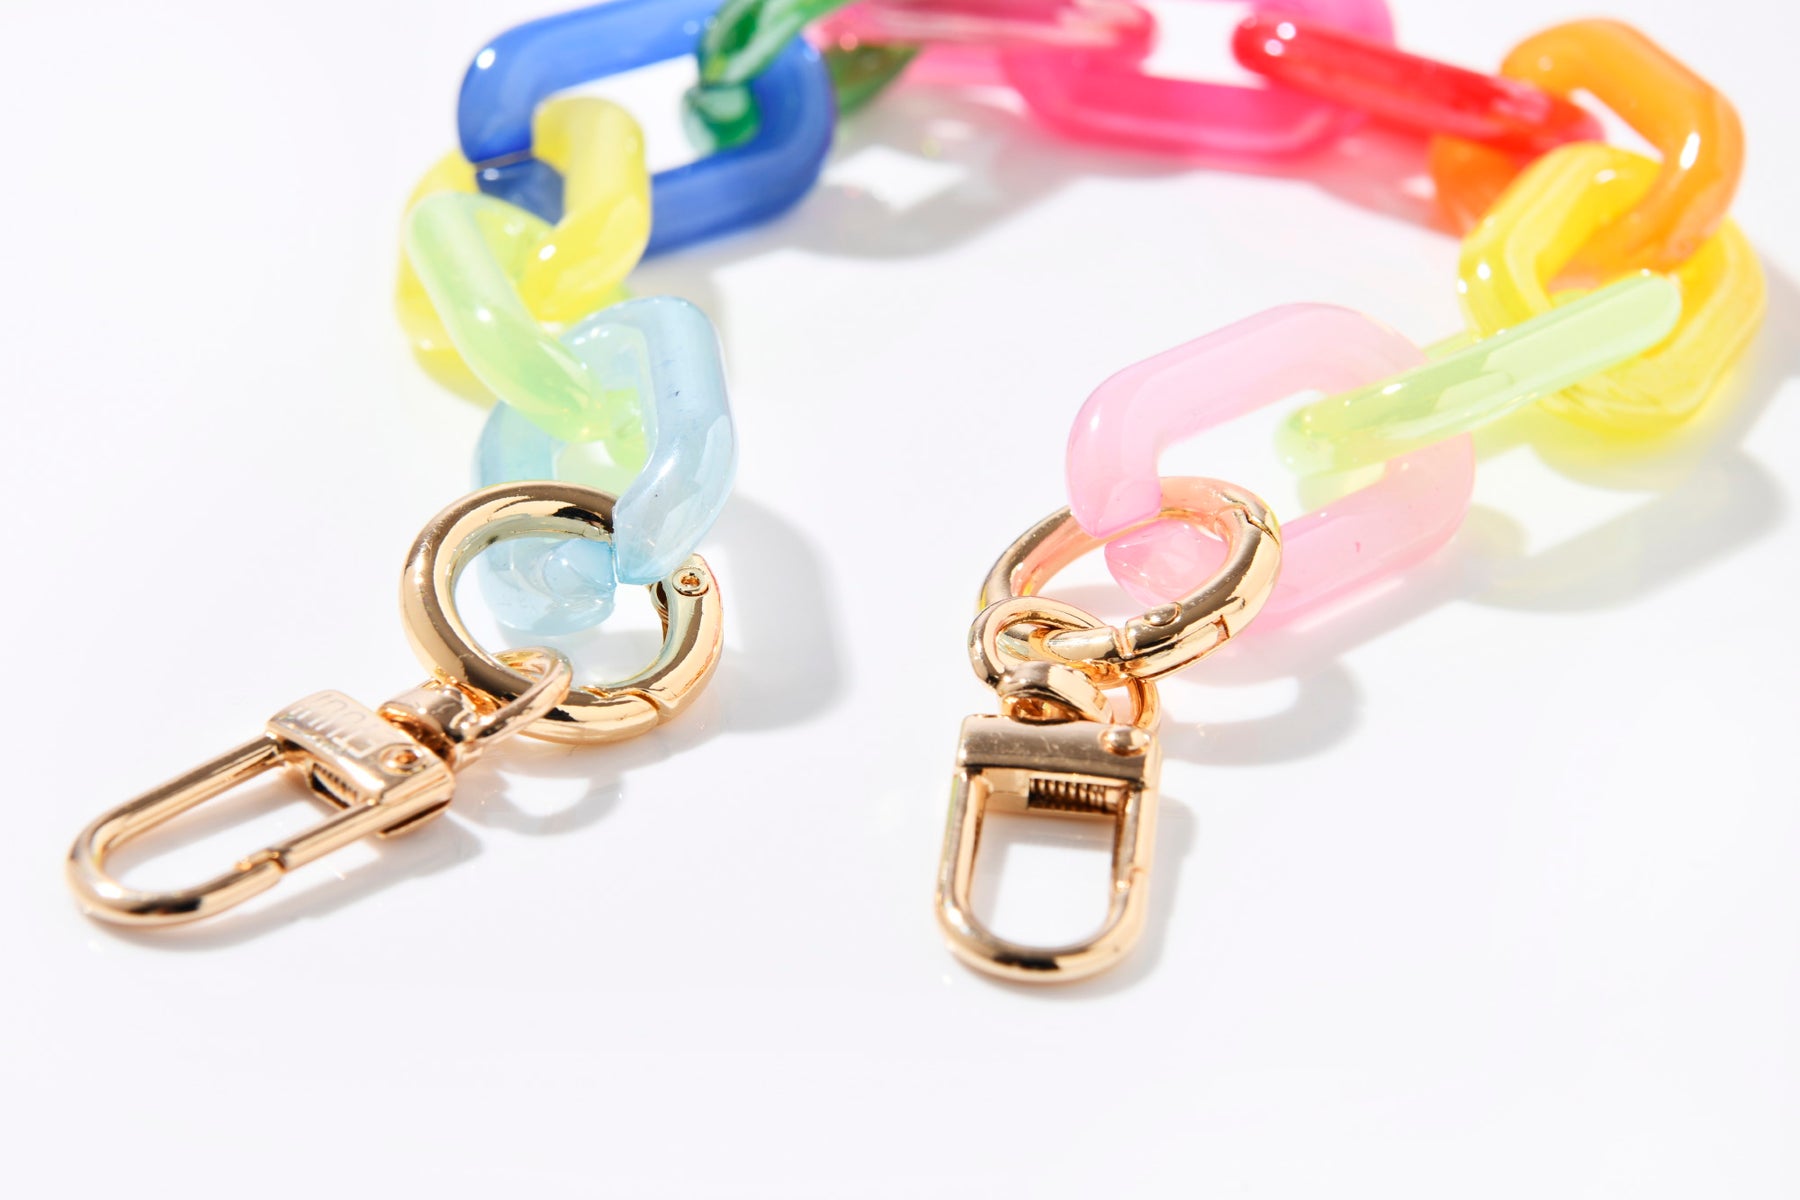 Candy Chain - Rainbow -  Limited Edition